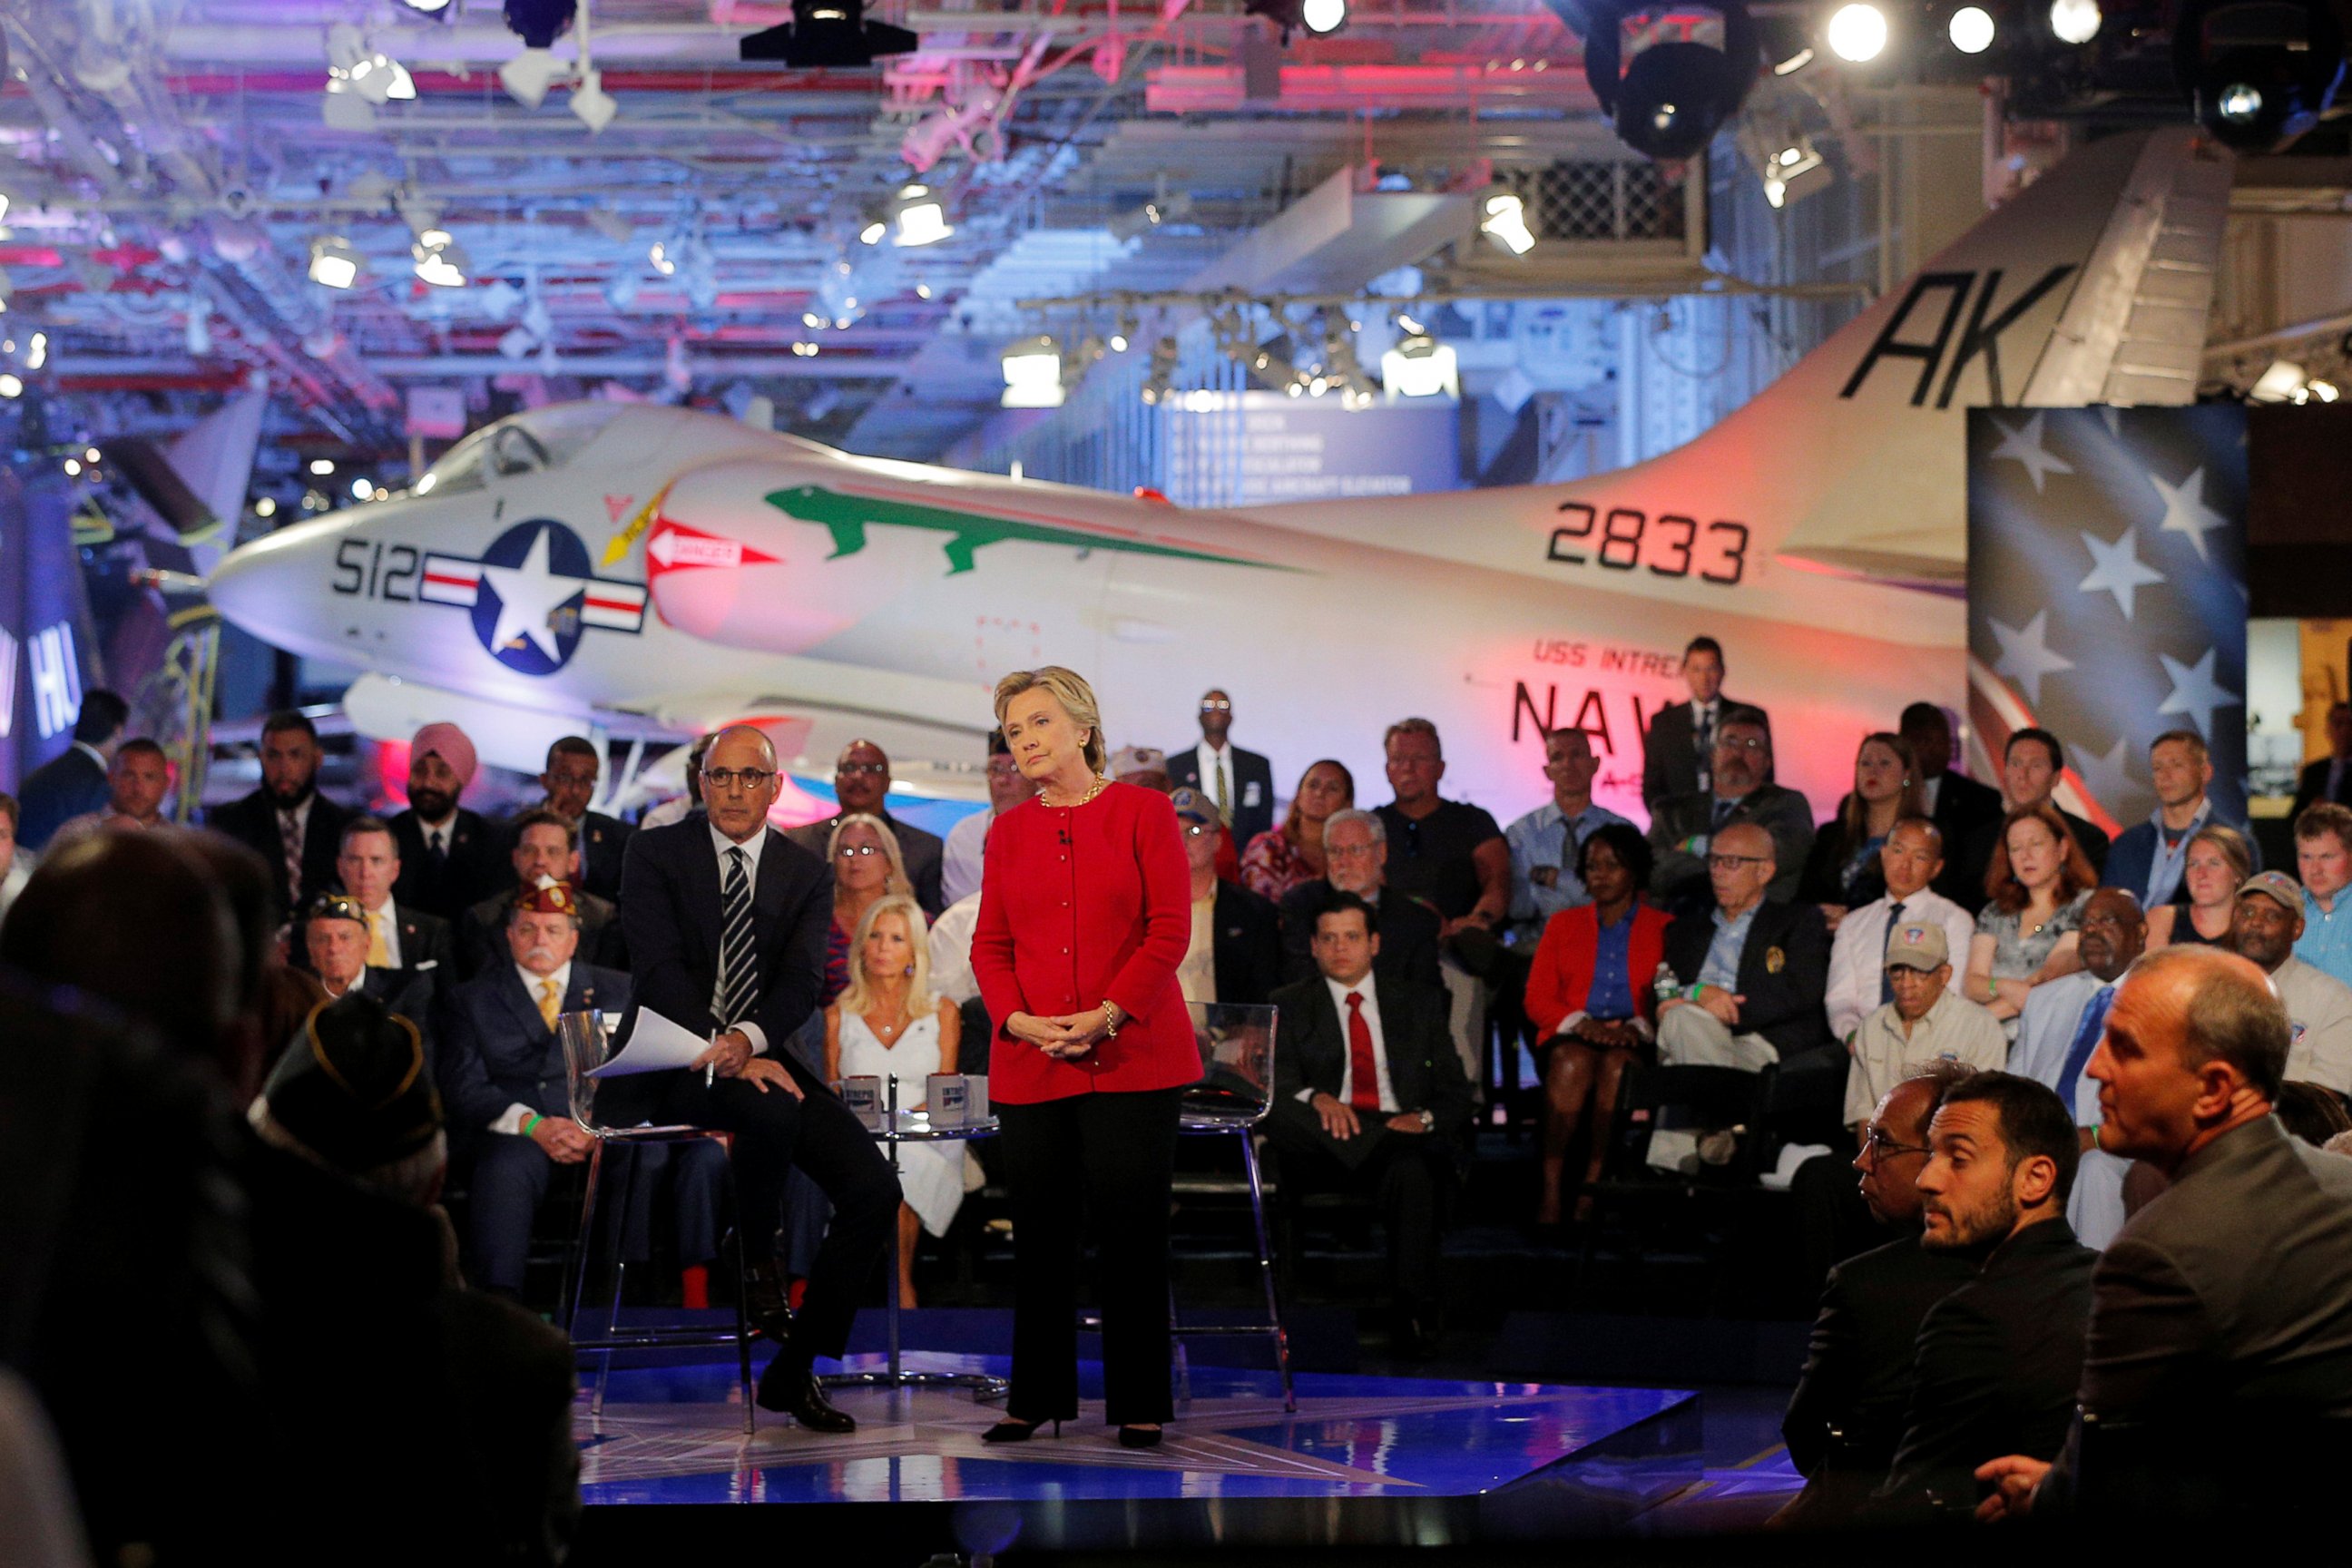 PHOTO: U.S. Democratic presidential candidate Hillary Clinton speaks at a presidential candidates "Commander-in-Chief" forum, moderated by Matt Lauer (L), aboard the decommissioned aircraft carrier "Intrepid" in New York, New York, September 7, 2016.